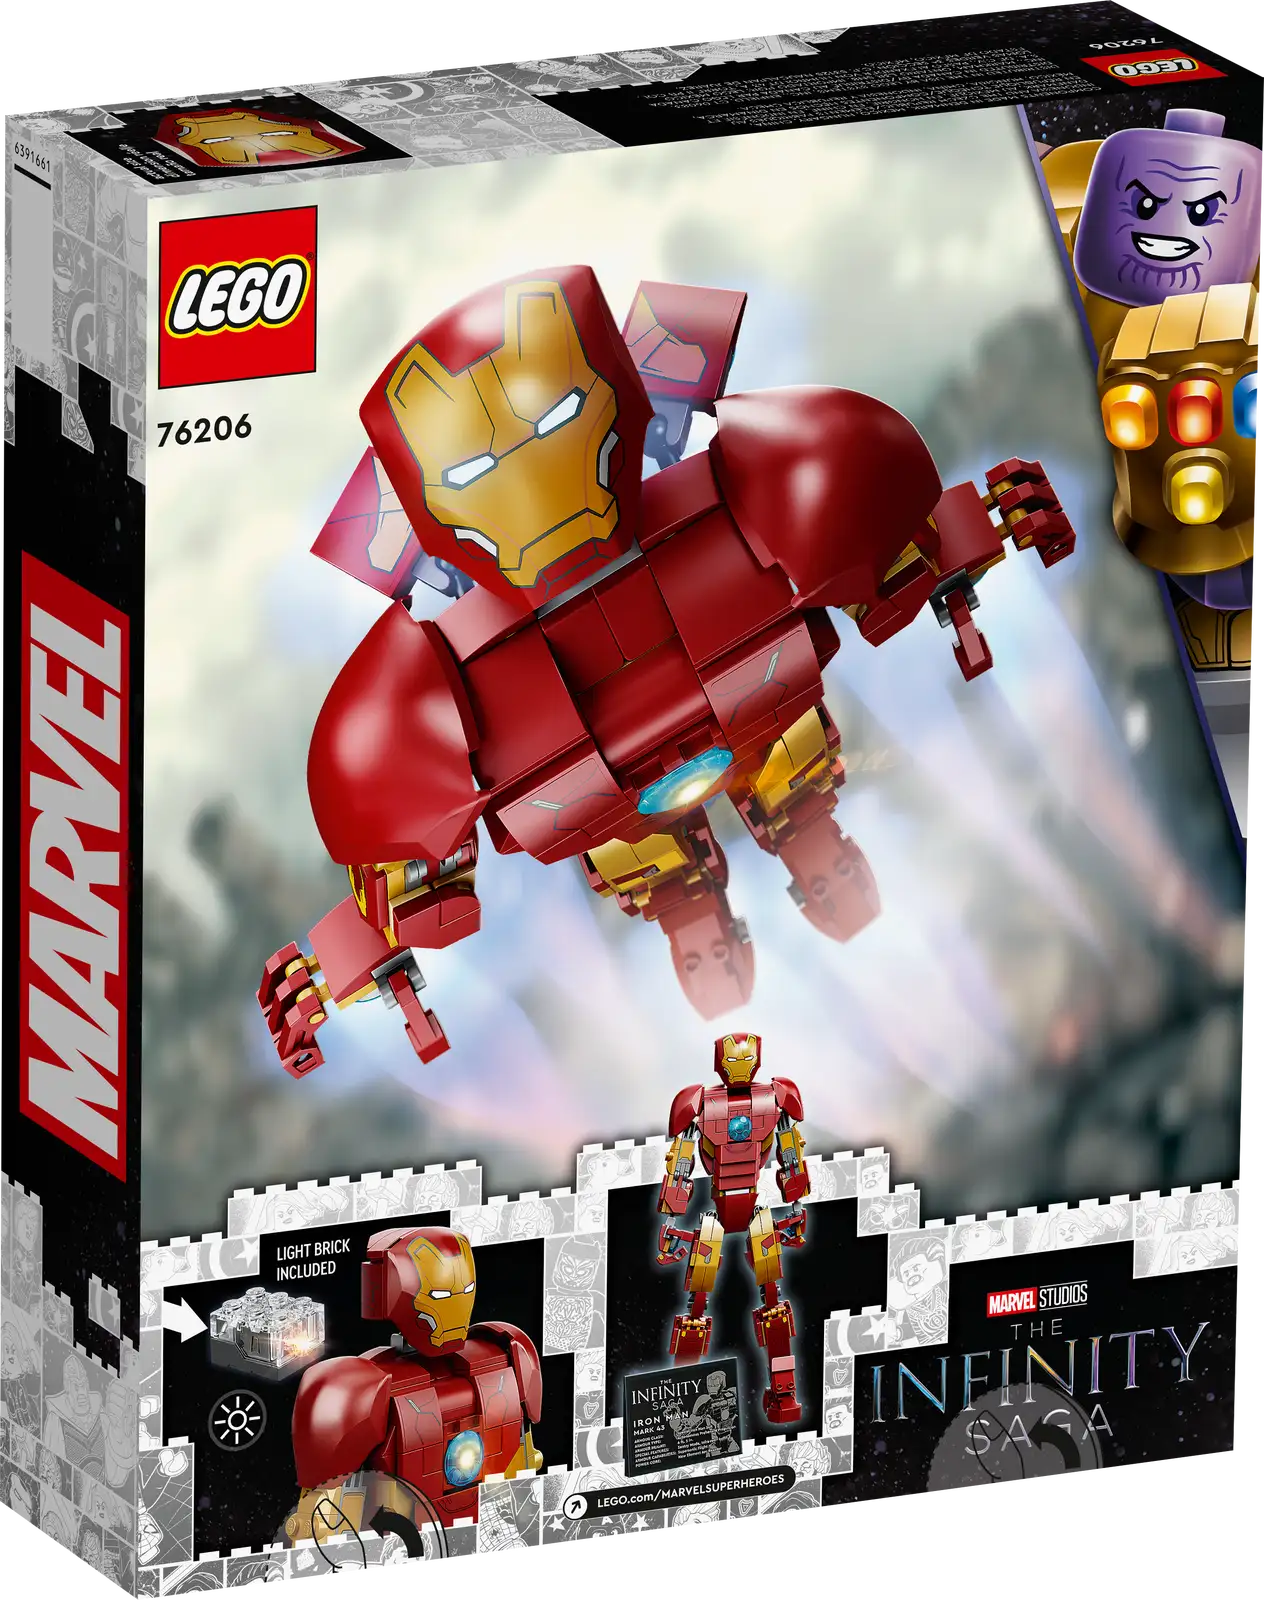 Give Iron Man fans aged 9 and up the ultimate gift: their own Iron Man . Standing over 9 in. (24 cm) tall, LEGO® Marvel Iron Man Figure (76206) is a buildable, take-anywhere toy that brings Marvel-movie authenticity to kids’ action-packed adventures. Just like the real thing Based on Iron Man from Marvel Studios’ Avengers: Age of Ultron, this realistic recreation is fully jointed, so kids can move and position the LEGO Marvel figure as they battle their way through exciting missions. A button-operated Light Brick adds extra realism as it illuminates the arc reactor in Iron Man’s chest. When not saving the universe, the Iron Man model looks great on display and includes a removable information plate with details about the iconic armored Avenger. The free LEGO Building Instructions app contains an additional digital guide that kids can use to zoom, rotate and visualize their model. There’s also a guided, real-life, building process that allows young builders to construct with confidence. An Iron Man of their own – LEGO® Marvel Iron Man Figure (76206) is the ultimate gift for fans of the armored Avenger Iconic Marvel hero – Kids assemble the 381 pieces into a realistic recreation of the metal-clad star of the Marvel movies Fully jointed – All parts of the buildable Iron Man are articulated, so kids can move, position and pose the armor just like the real thing Treat for Marvel fans – A birthday, holiday or just-because gift for young Super Heroes aged 9 and up Portable play – This take-anywhere Iron Man stands over 9 in. (24 cm) tall, the perfect size for hands-on action, and kids can carry it wherever they go Additional in-app features – With the LEGO® Building Instructions app, kids can zoom, rotate and visualize a digital version of their model as they build Iconic sets– All LEGO® Marvel building toys provide young Super Heroes with premium-quality playsets designed to deliver endless imaginative play possibilities Quality guaranteed – LEGO® components fulfill stringent industry quality standards to ensure they are consistent, compatible and connect and pull apart perfectly every time Safety assured – LEGO® components are dropped, heated, crushed, twisted and analyzed to make sure they satisfy rigorous global safety standards